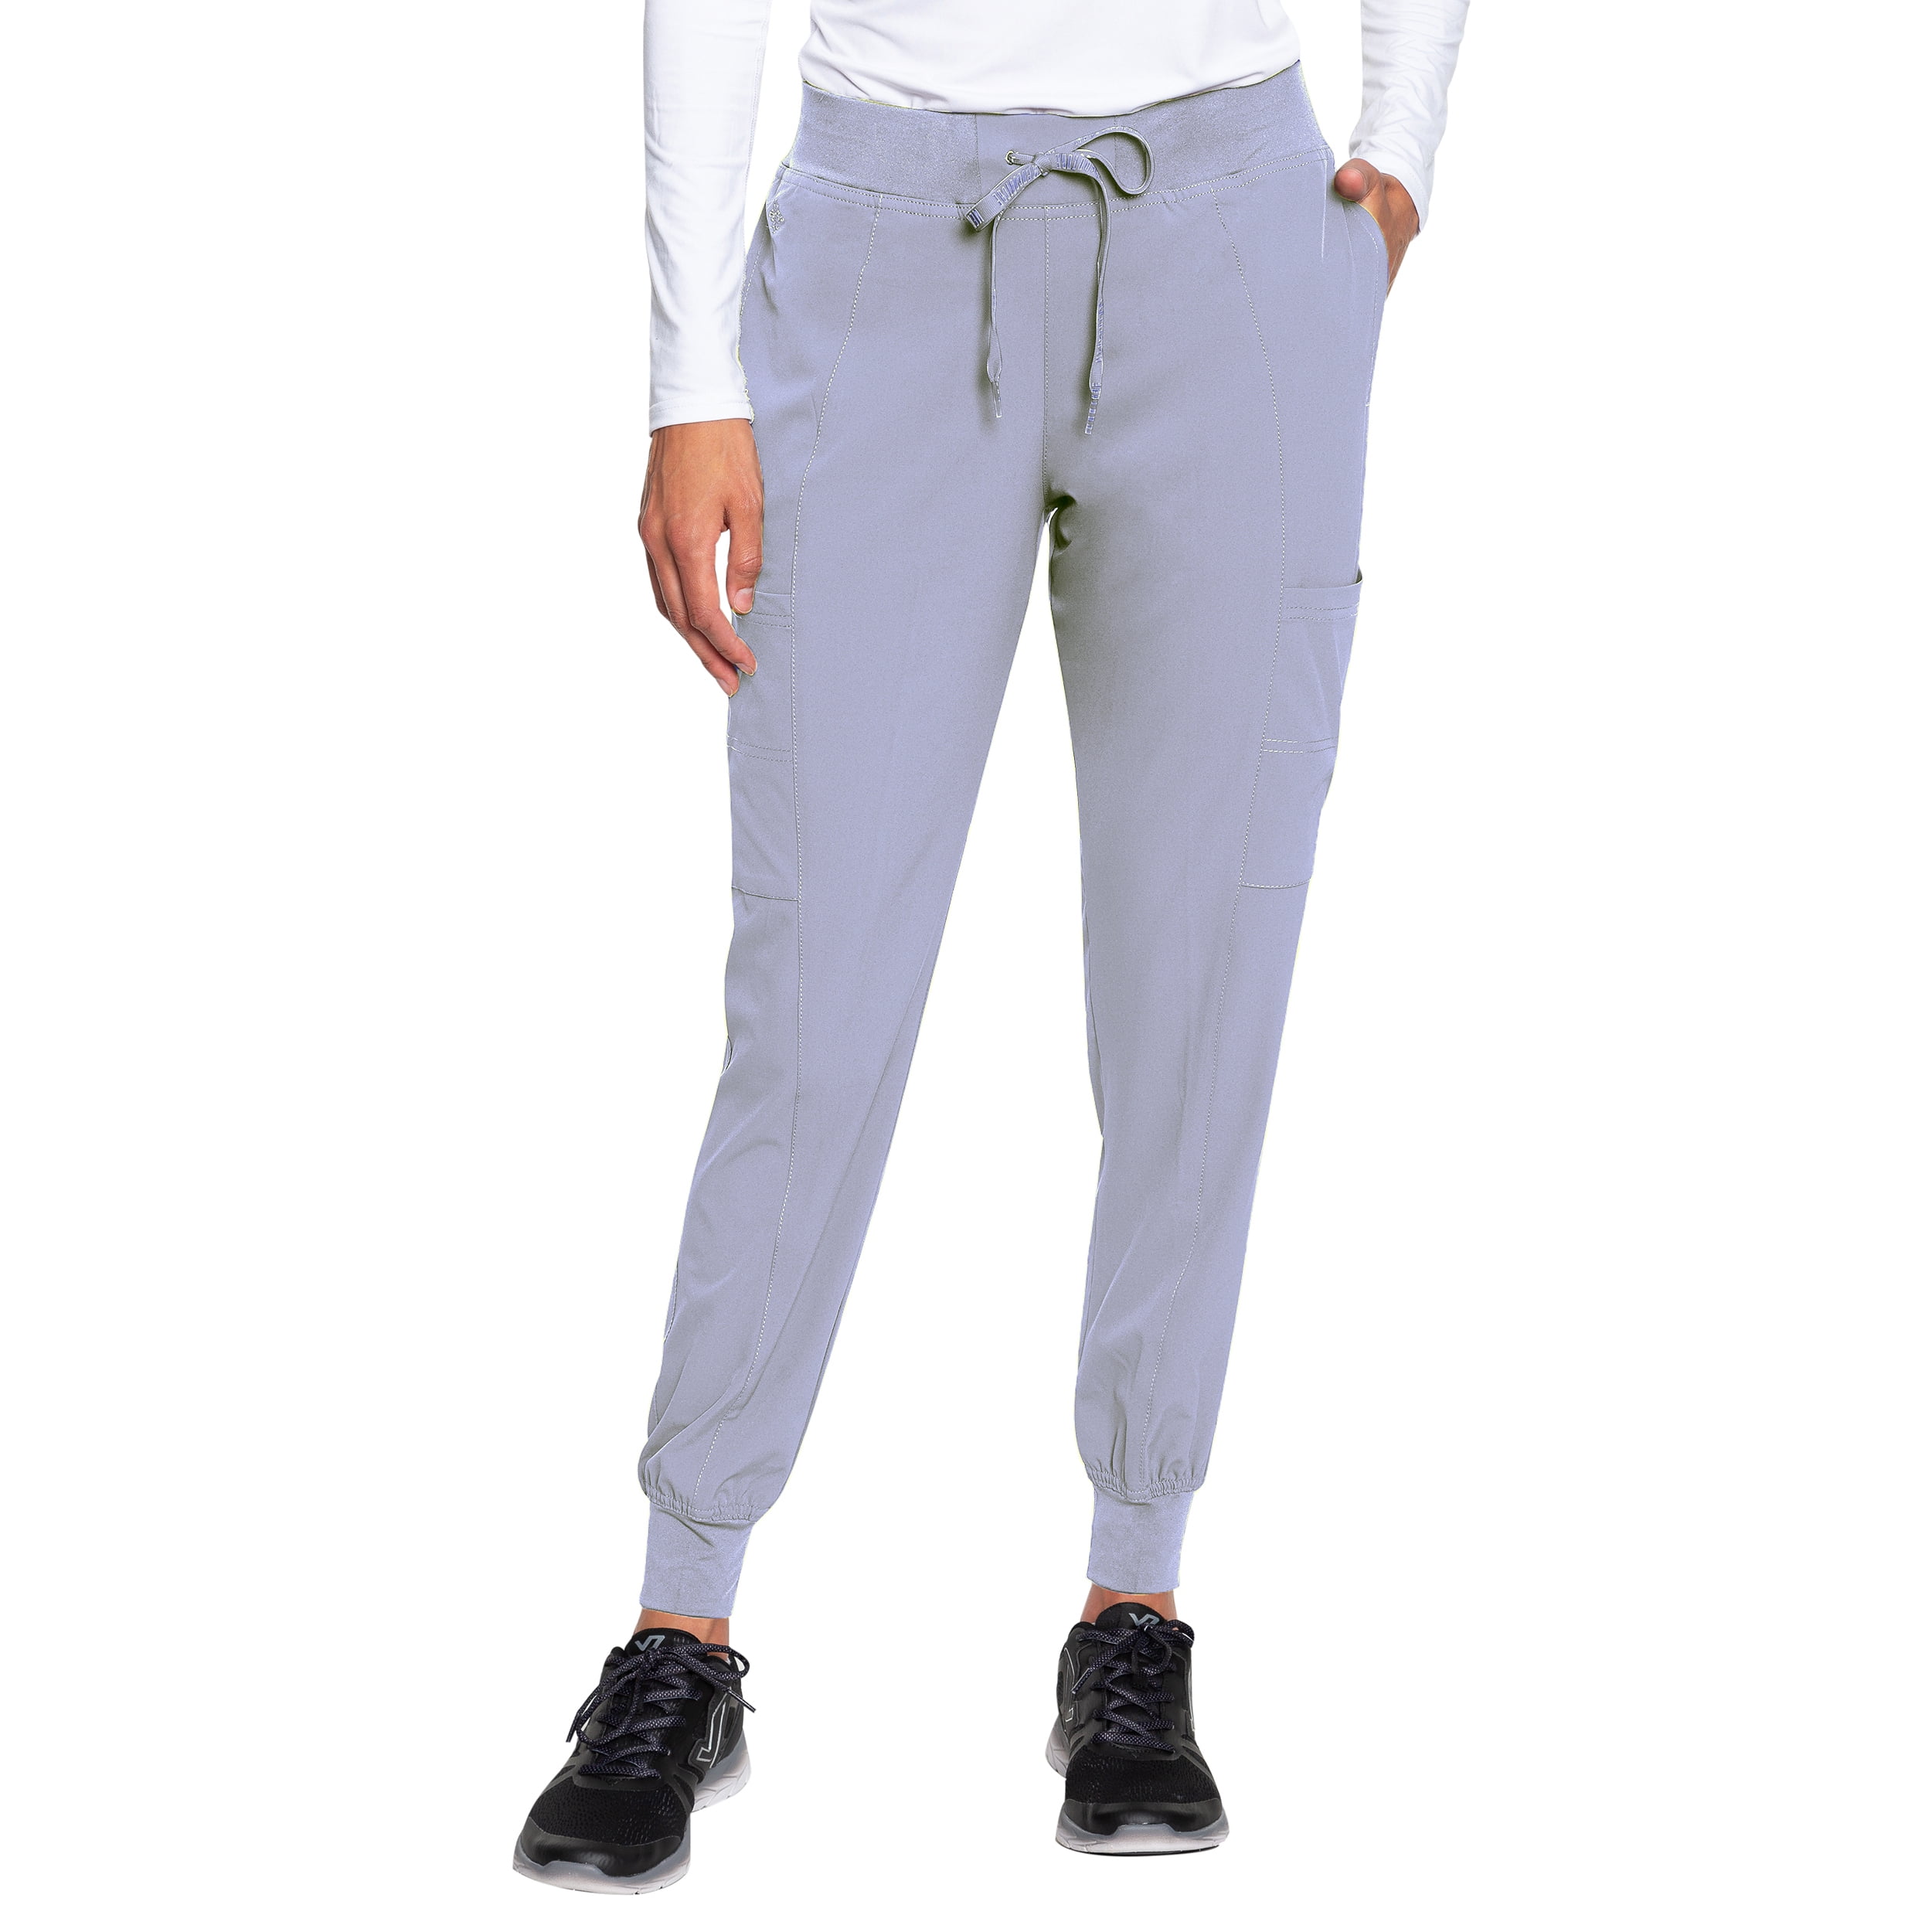 Med Couture Peaches Women's Seamed Jogger Pant 